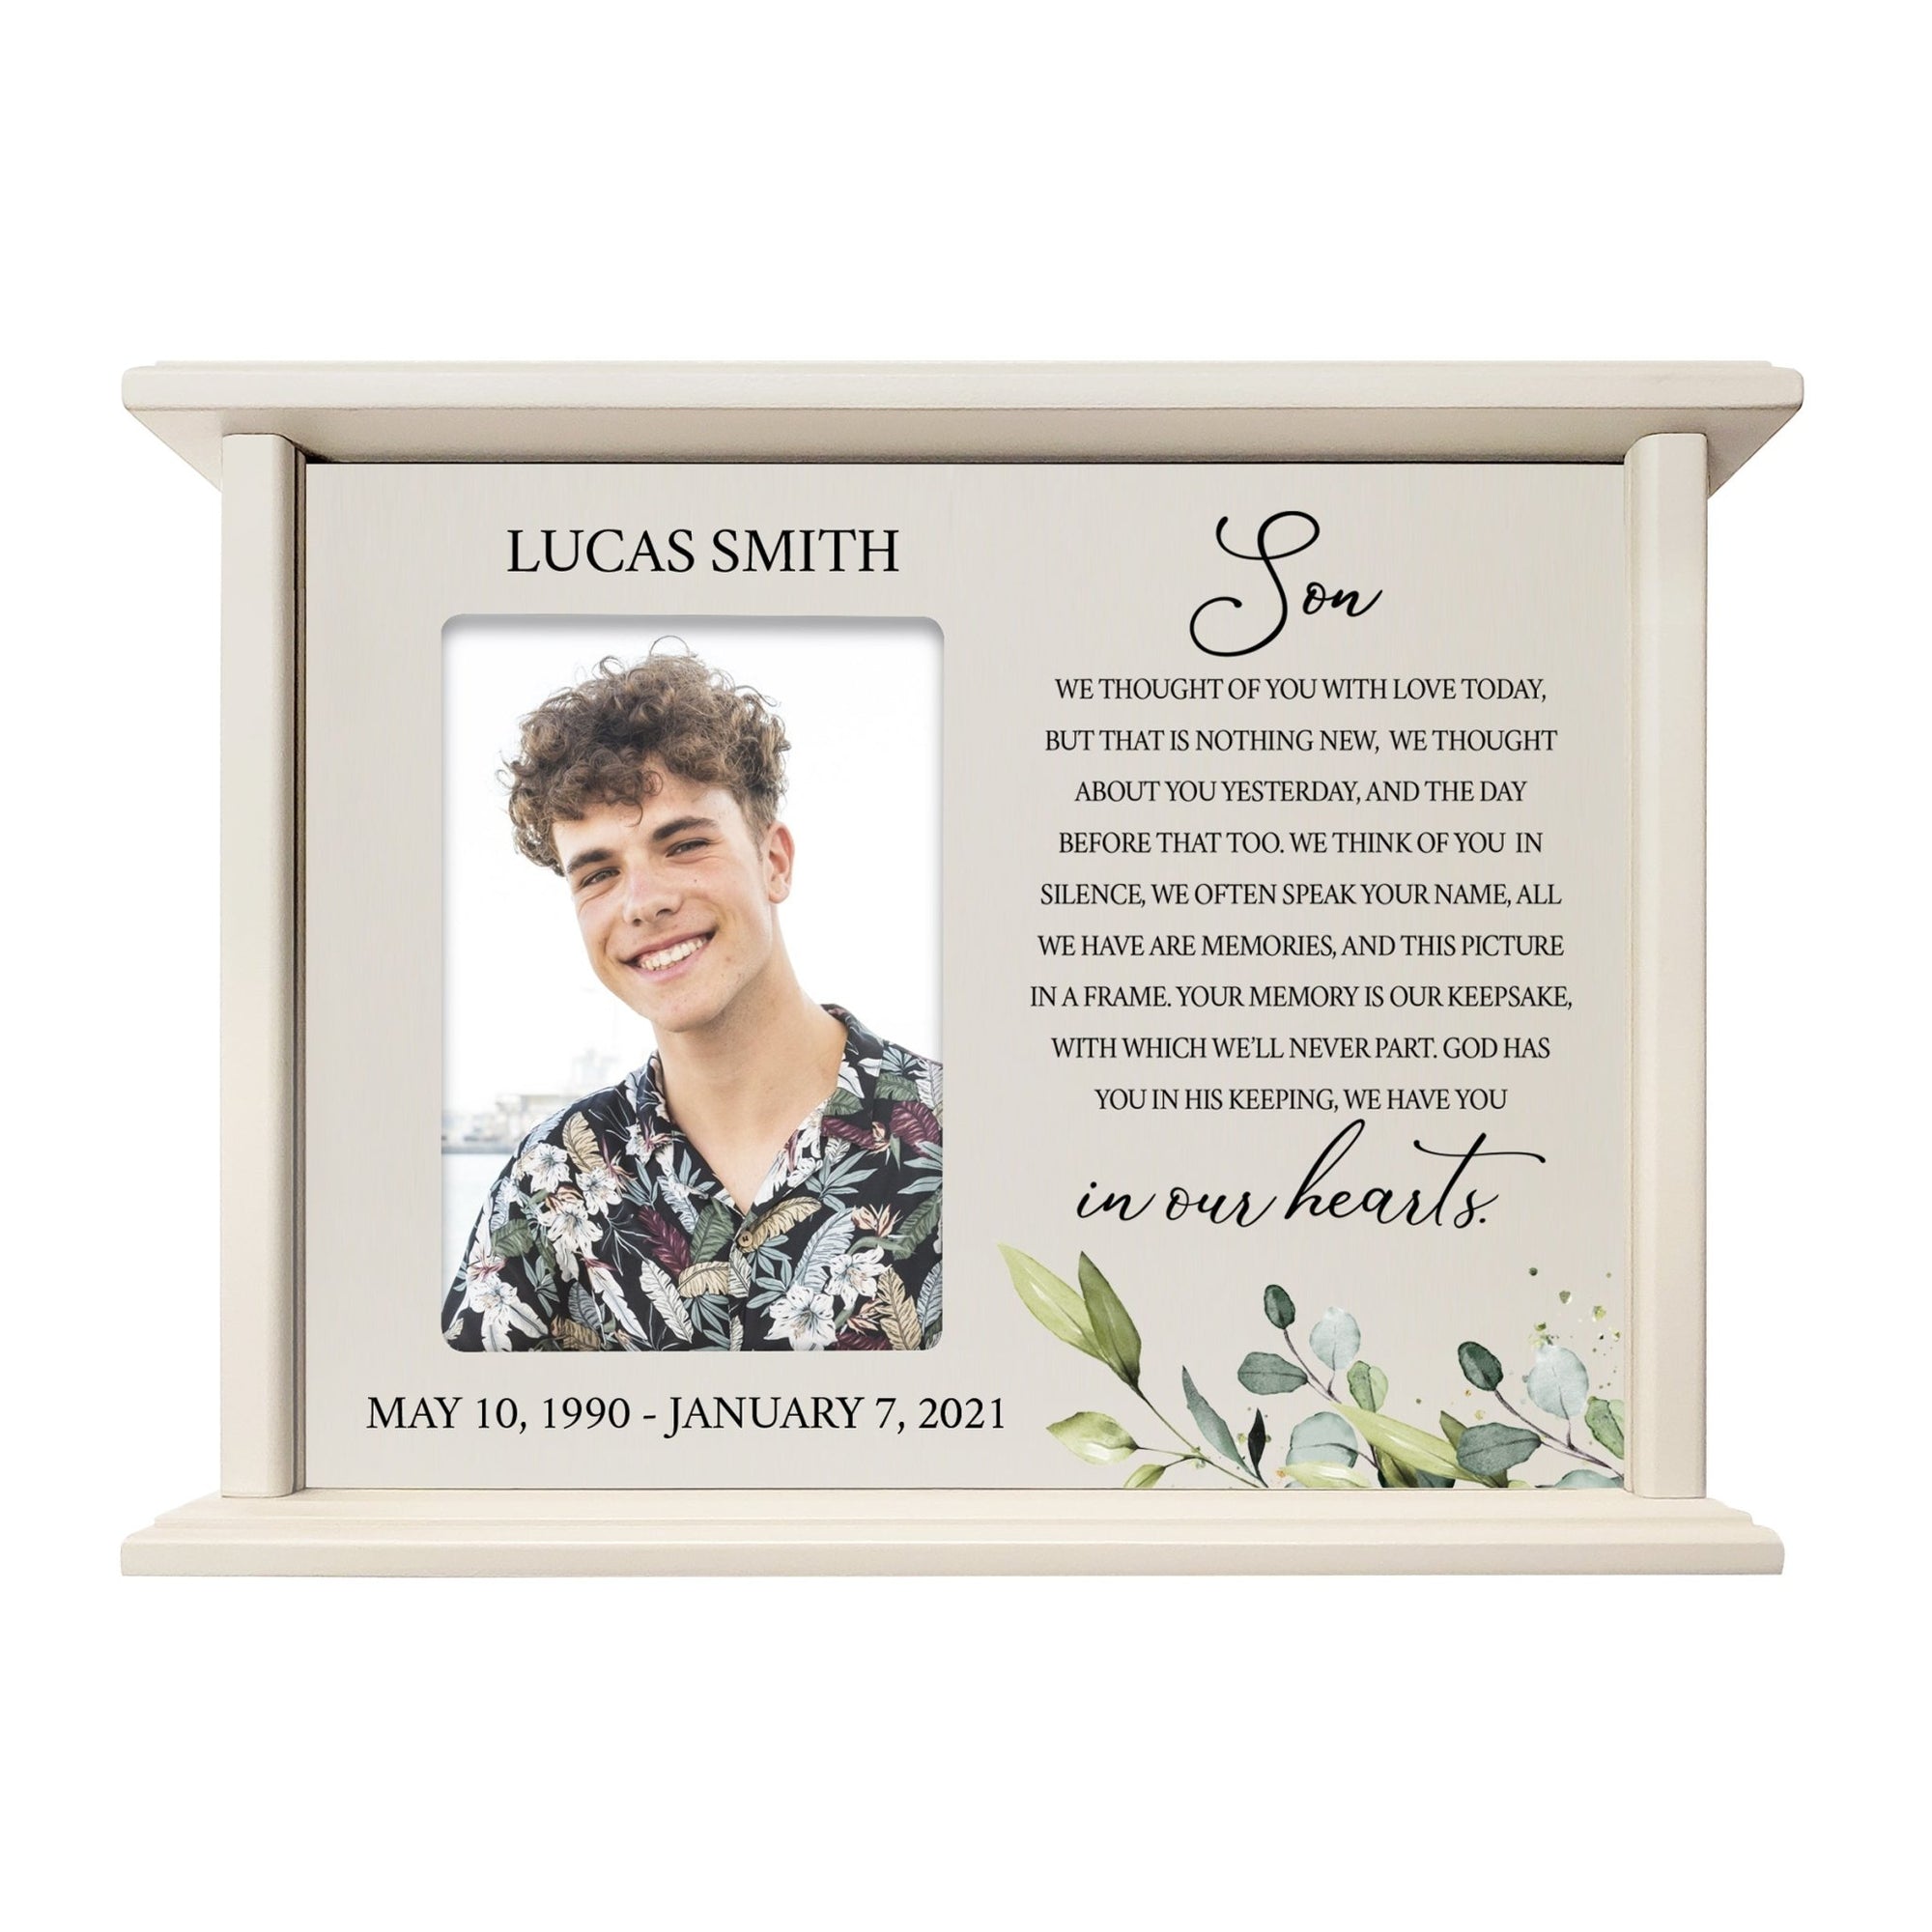 Custom Memorial Photo Cremation Urn Box for Human Ashes